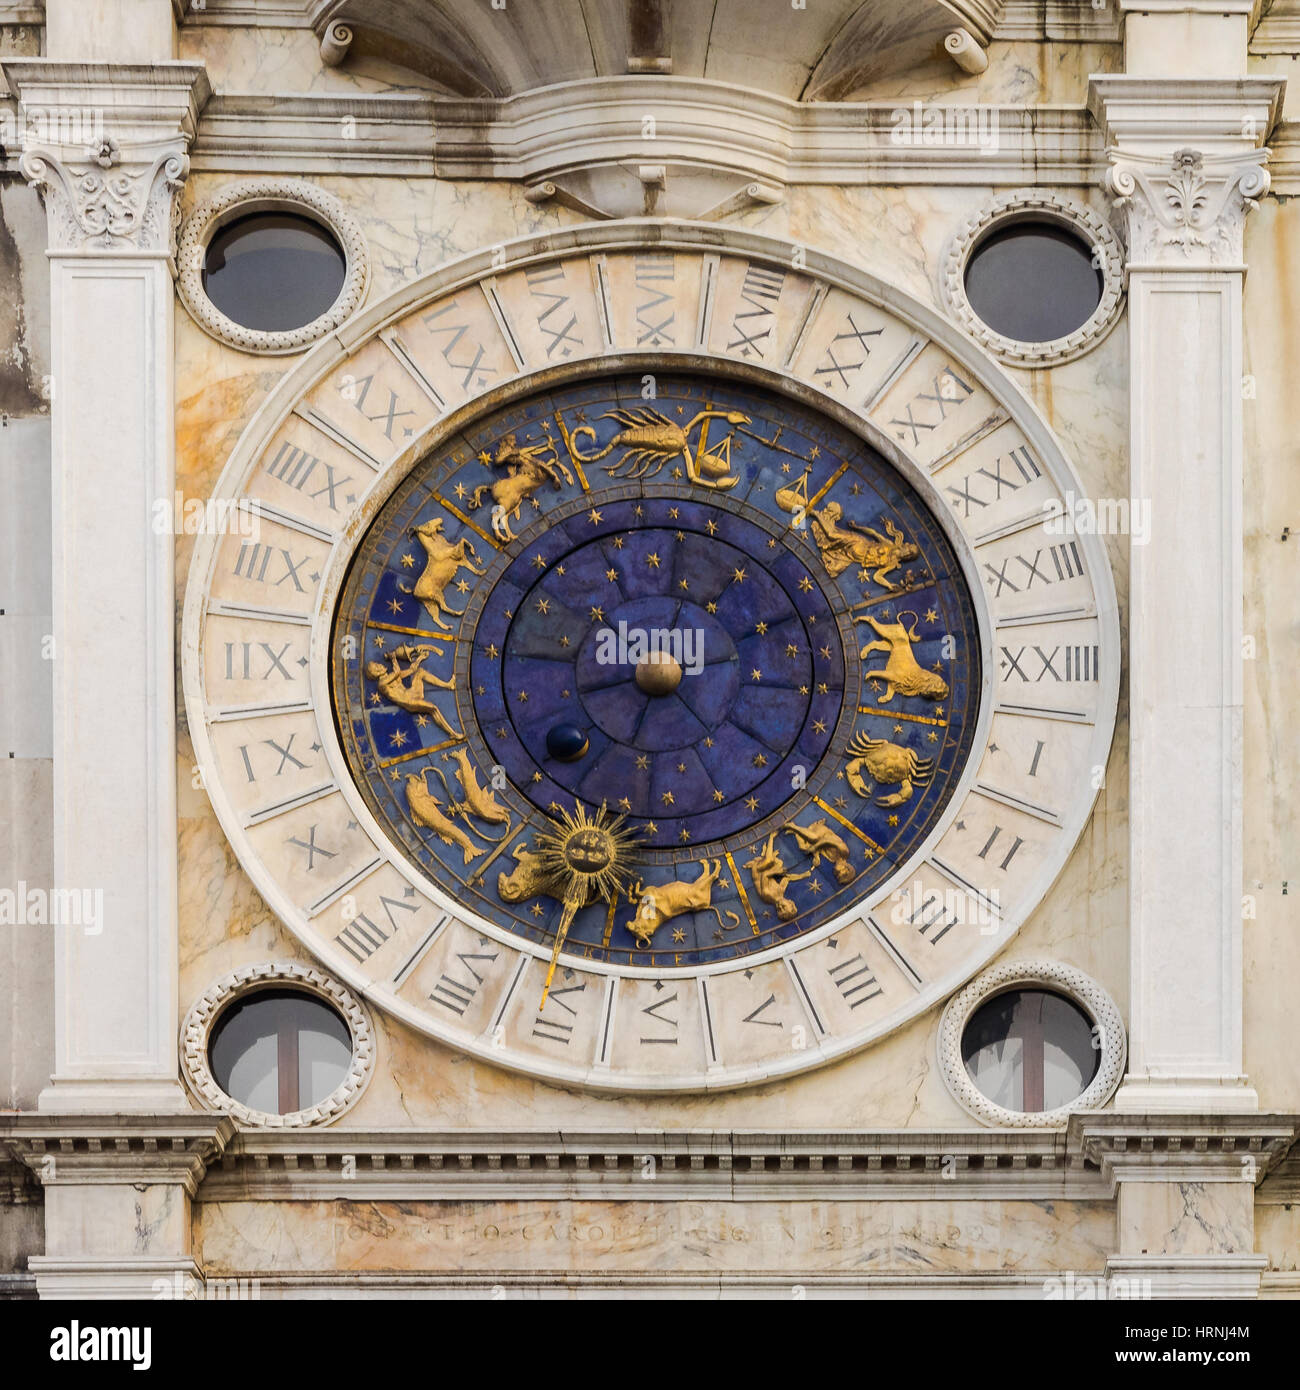 Astronomic clock at a tower at St. Mark's square, Venice, Italy Stock Photo